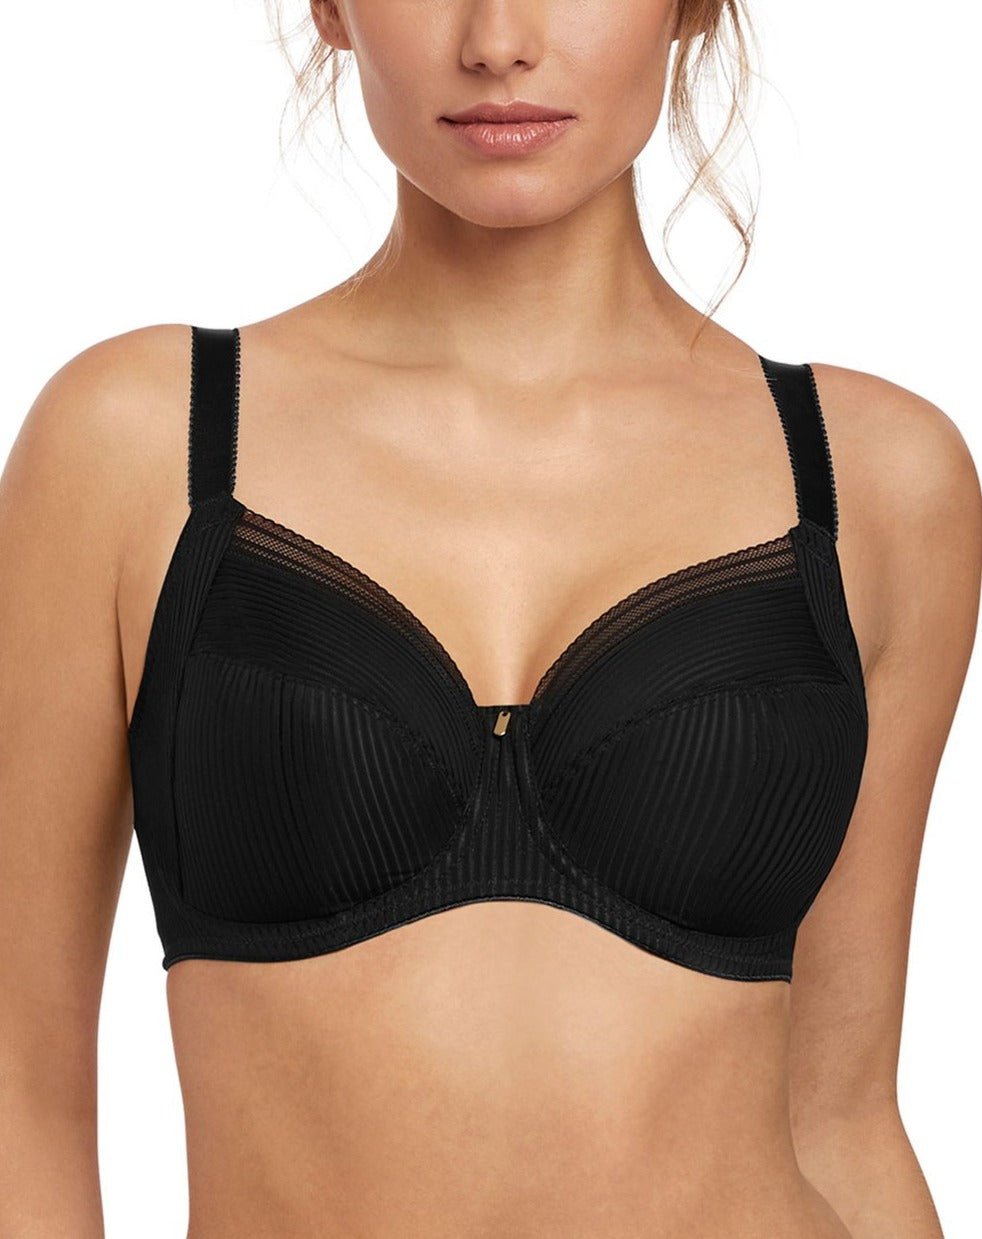 Fantasie Fusion Full Cup Side Support Bra - Black - An Intimate